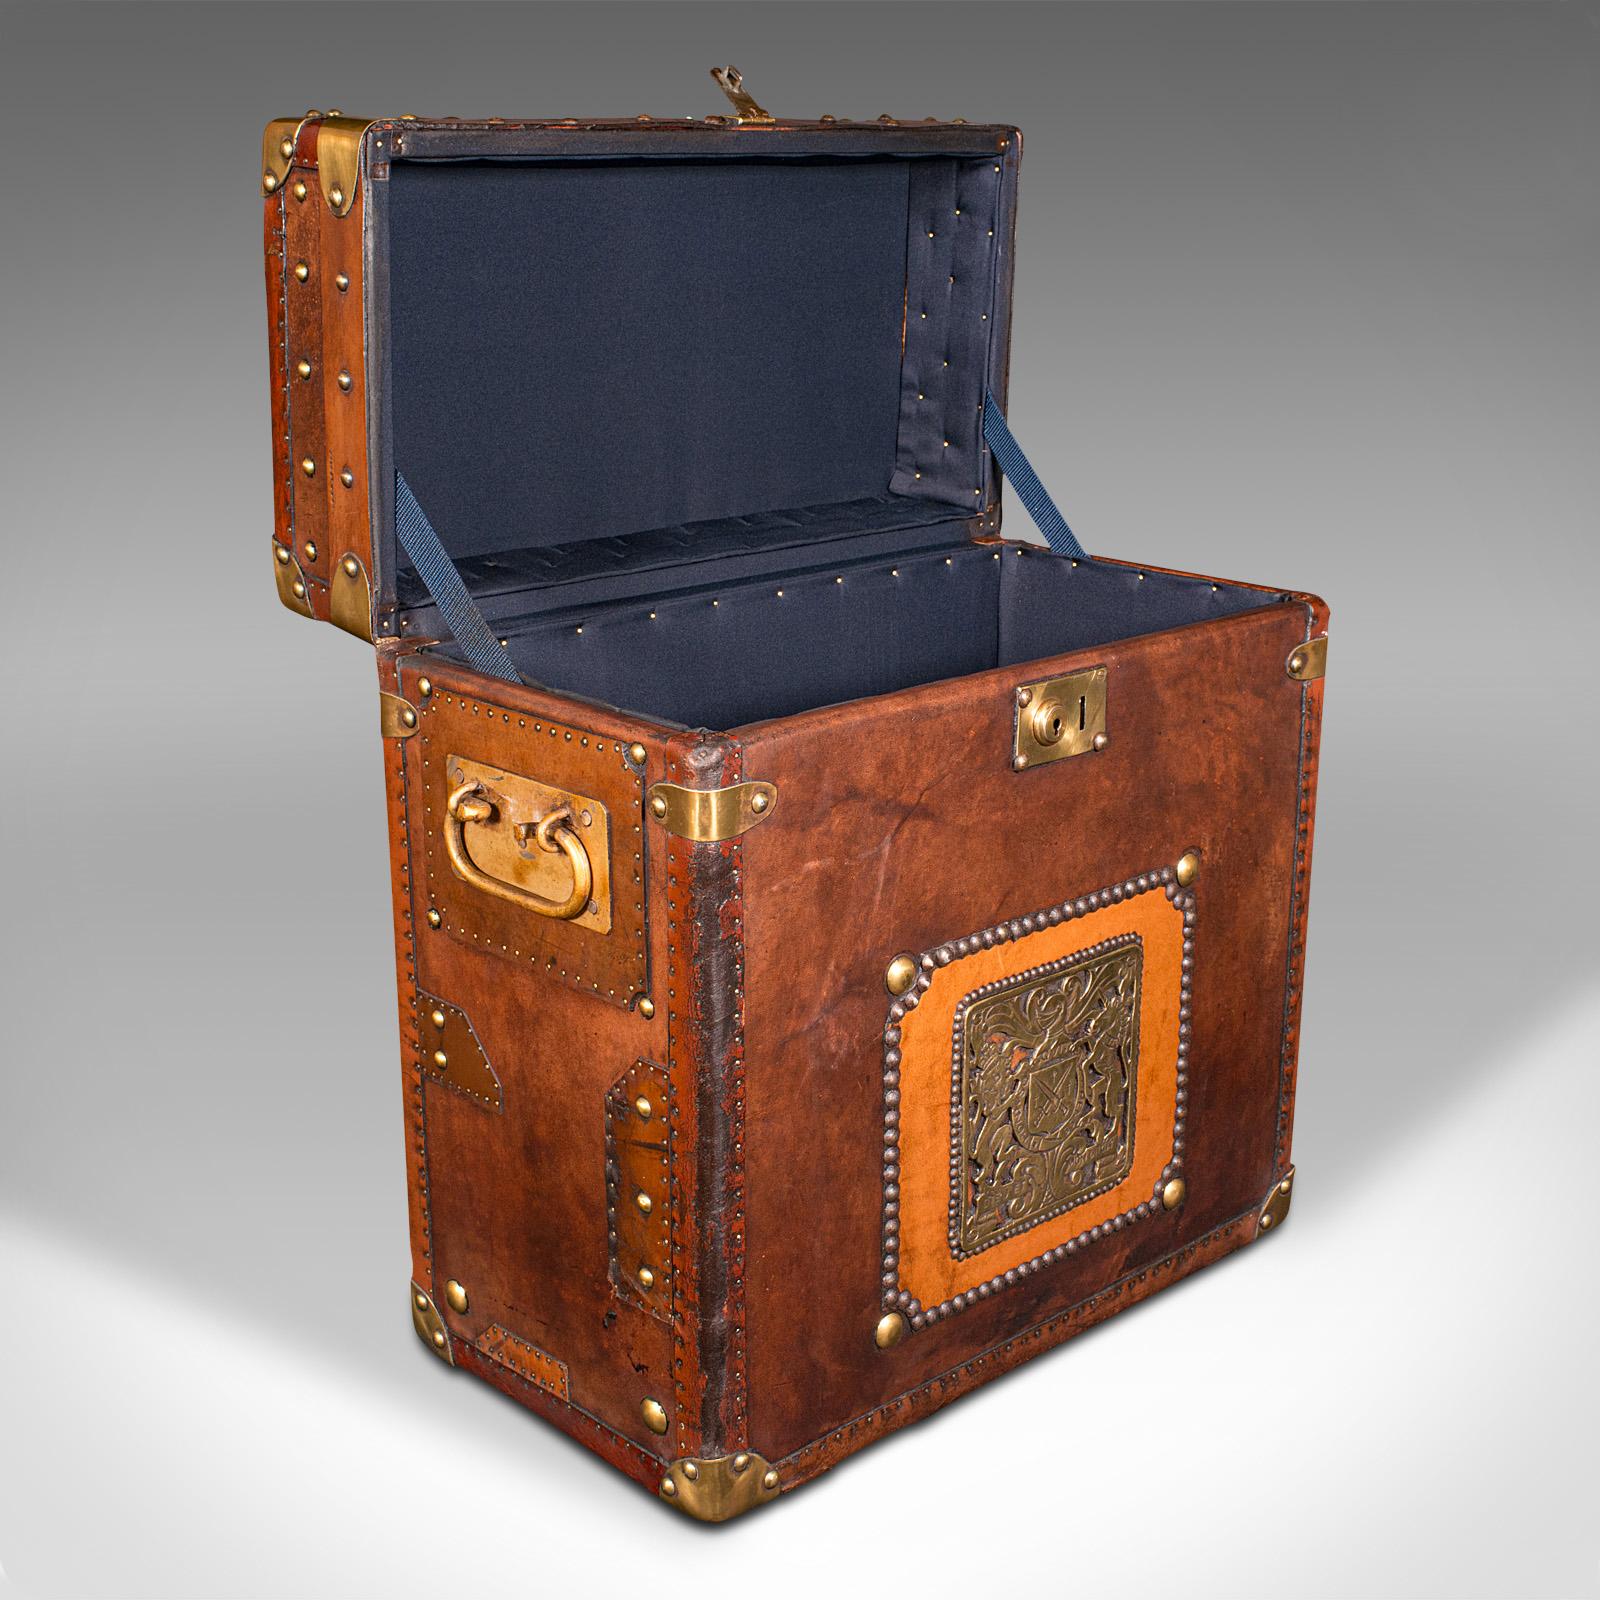 This is a vintage campaign luggage case. An English, leather and brass bedside nightstand, dating to mid 20th century, circa 1960.
 
Delightfully eye-catching and of superior craftsmanship
Displays a desirable aged patina and in good order